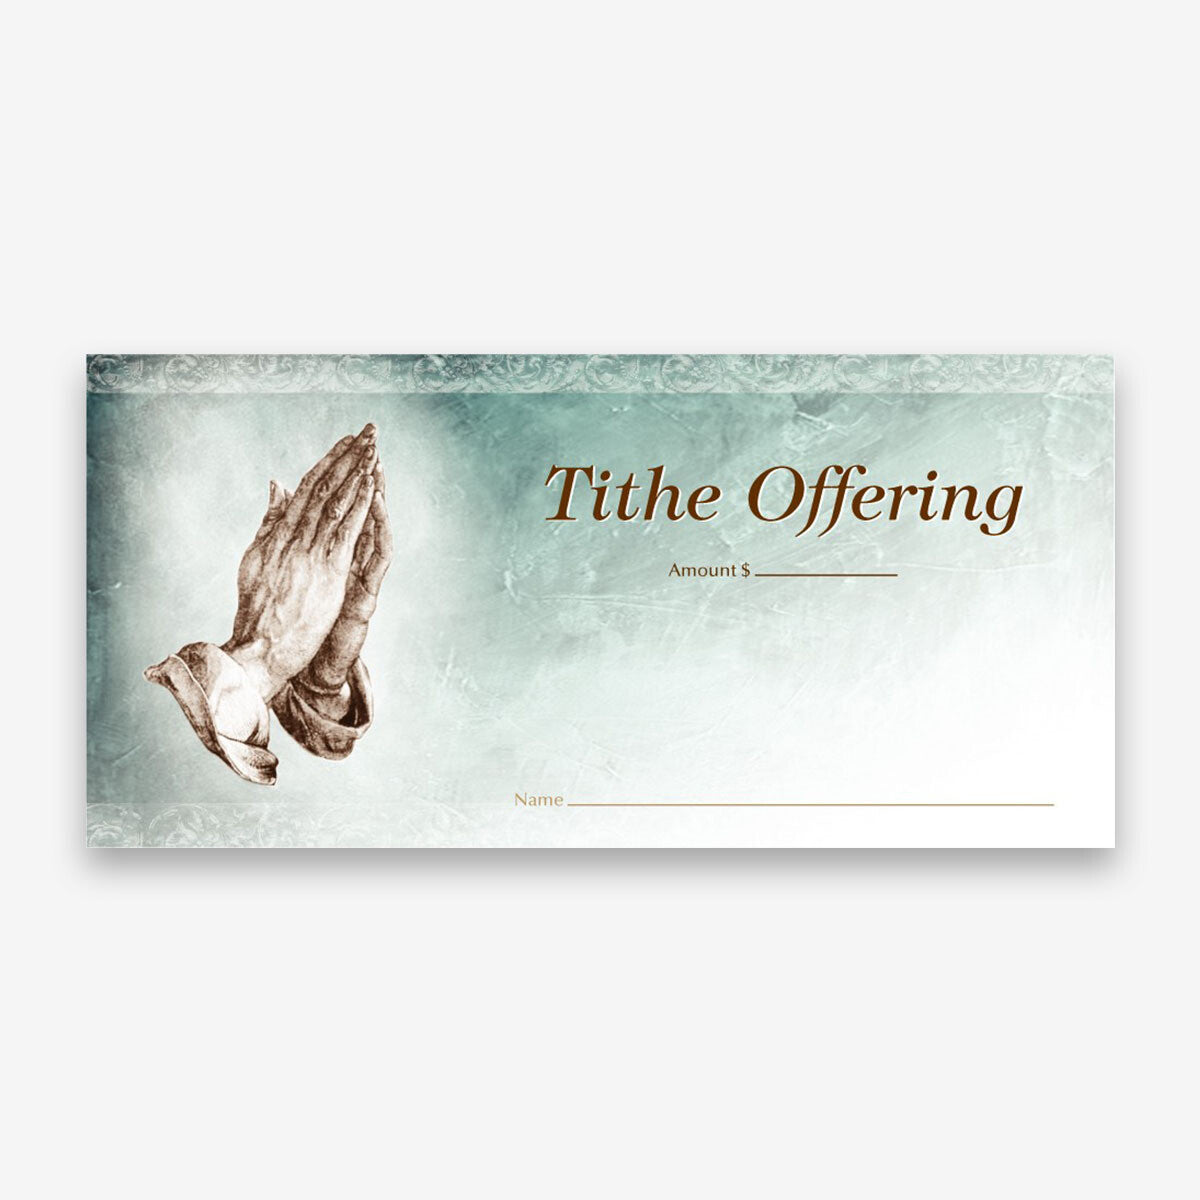 NCS National Church Solutions Tithe Offering Envelope